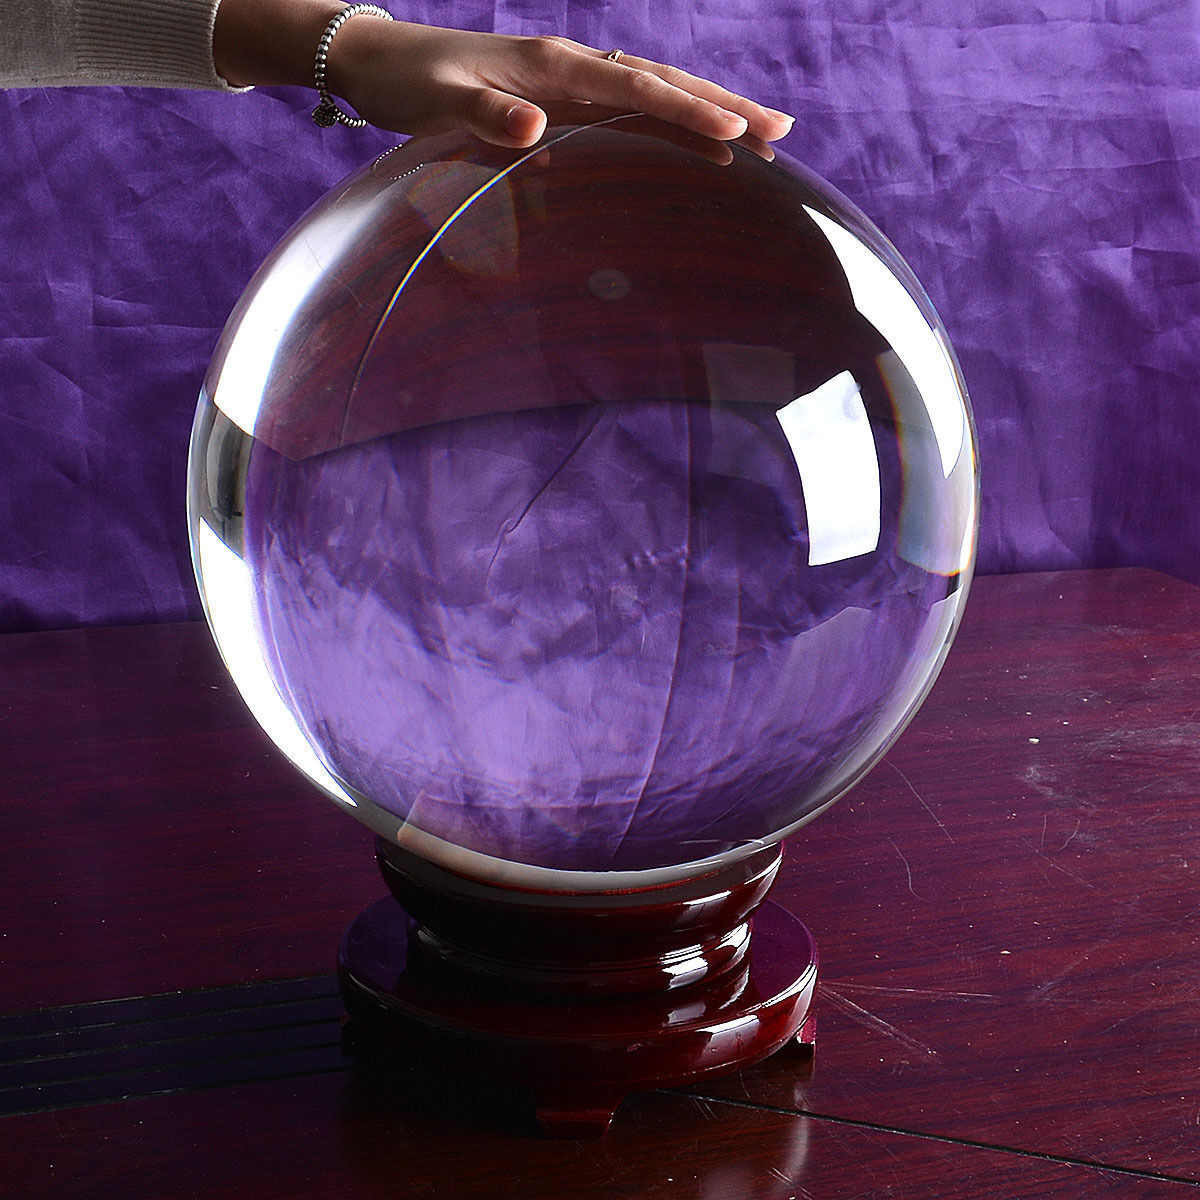 LONGWIN 250MM Clear Crystal Ball Meditation Glass Sphere Photo Prop Free Stand